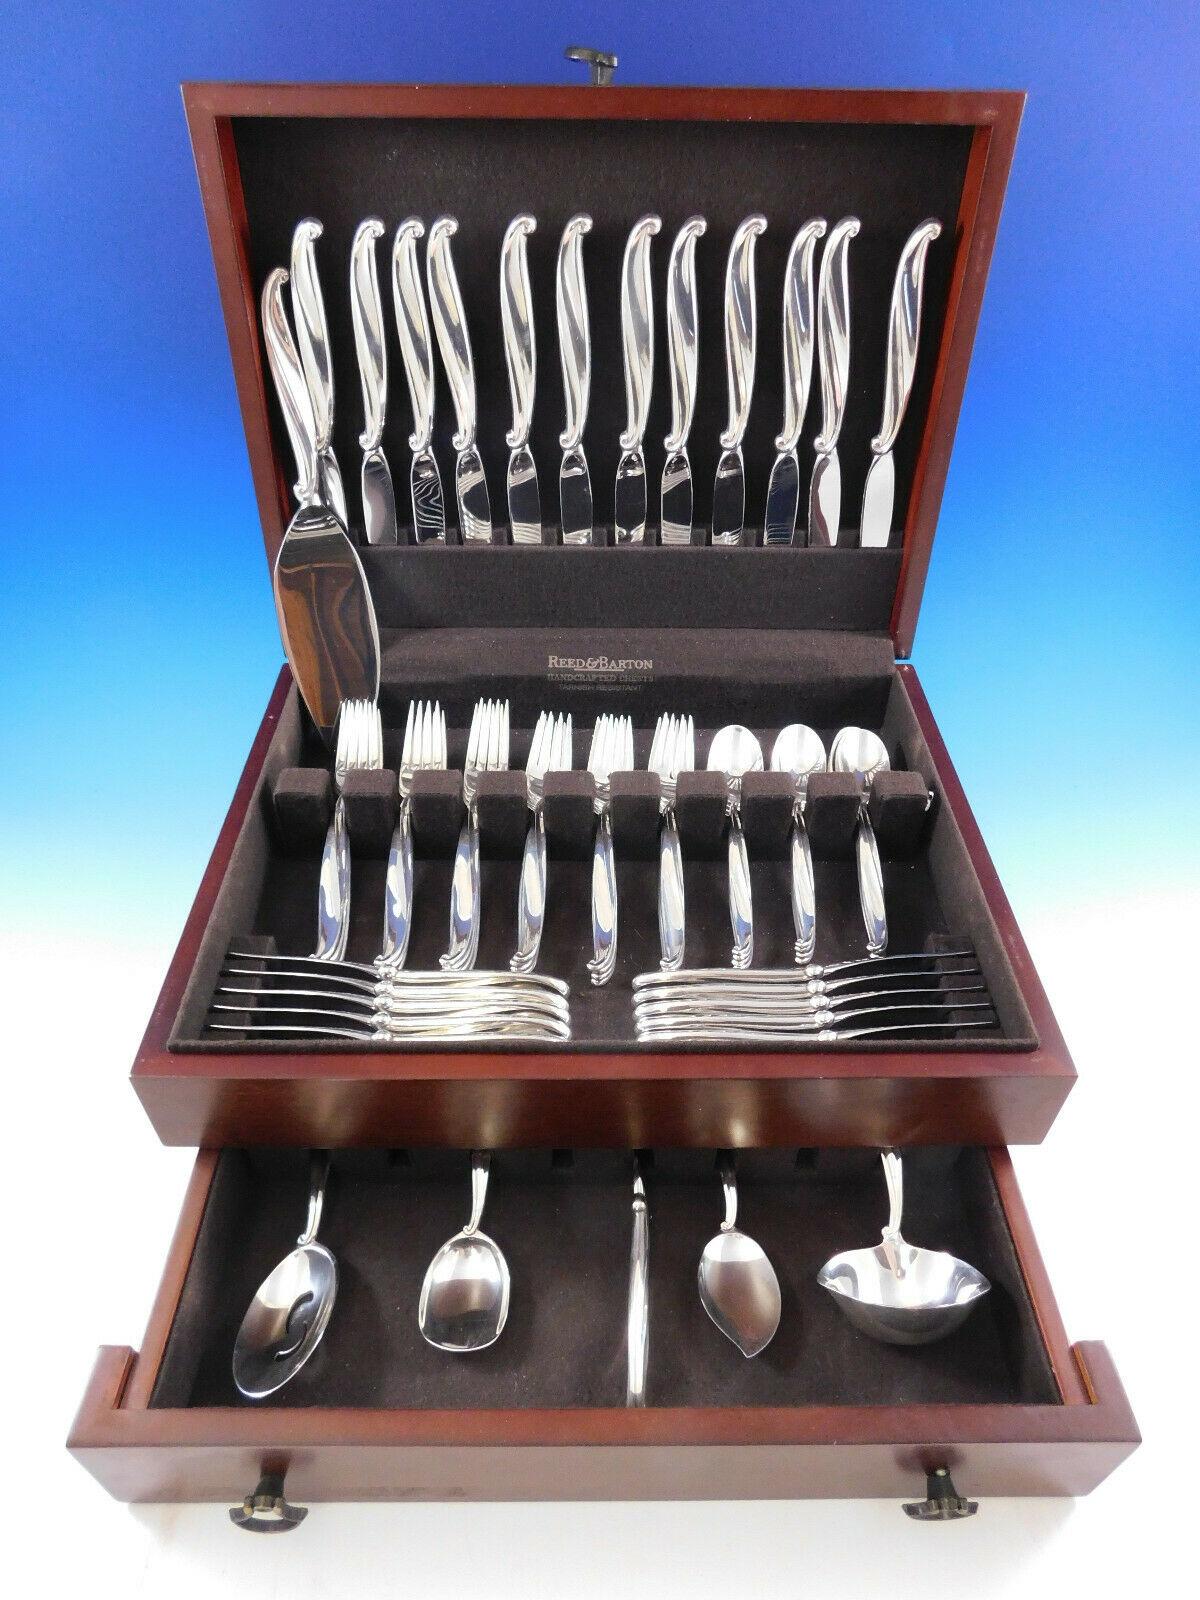 Modern design Swan Lake by International, circa 1960, sterling silver flatware set, 66 pieces. This set includes:

12 Knives, 9